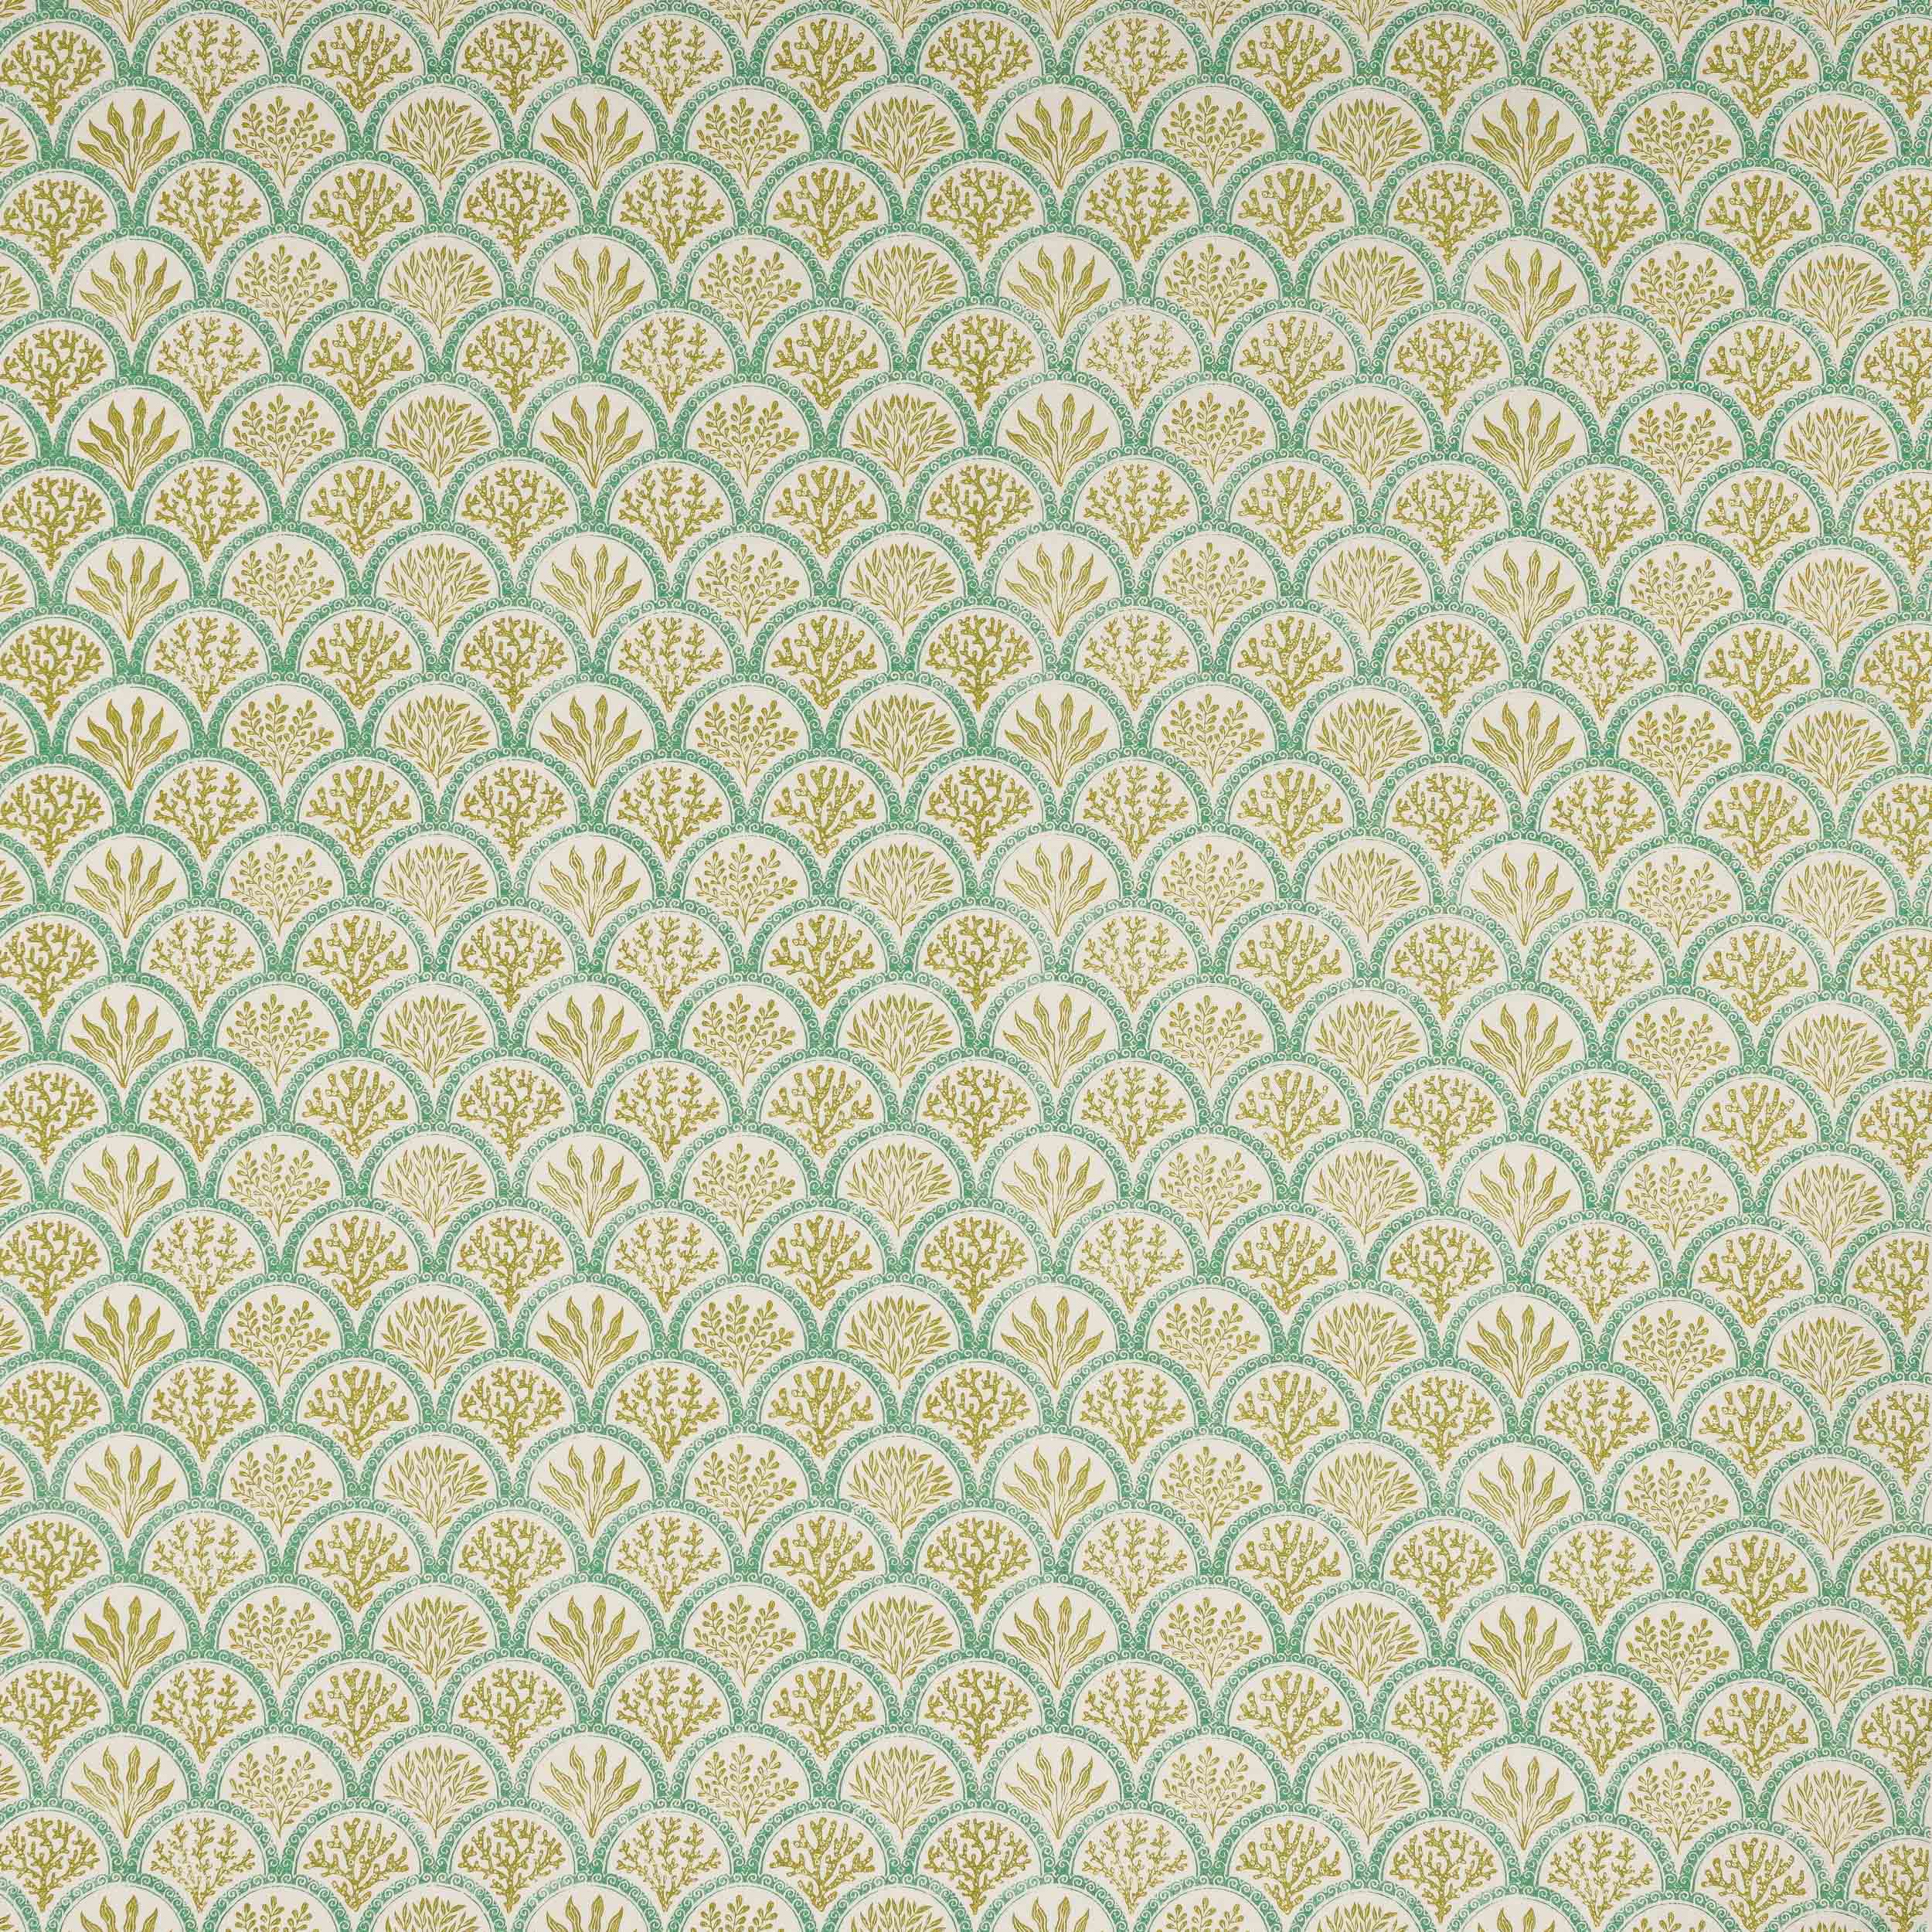 Coralli Fabric in Blue/Teal by Jane Churchill